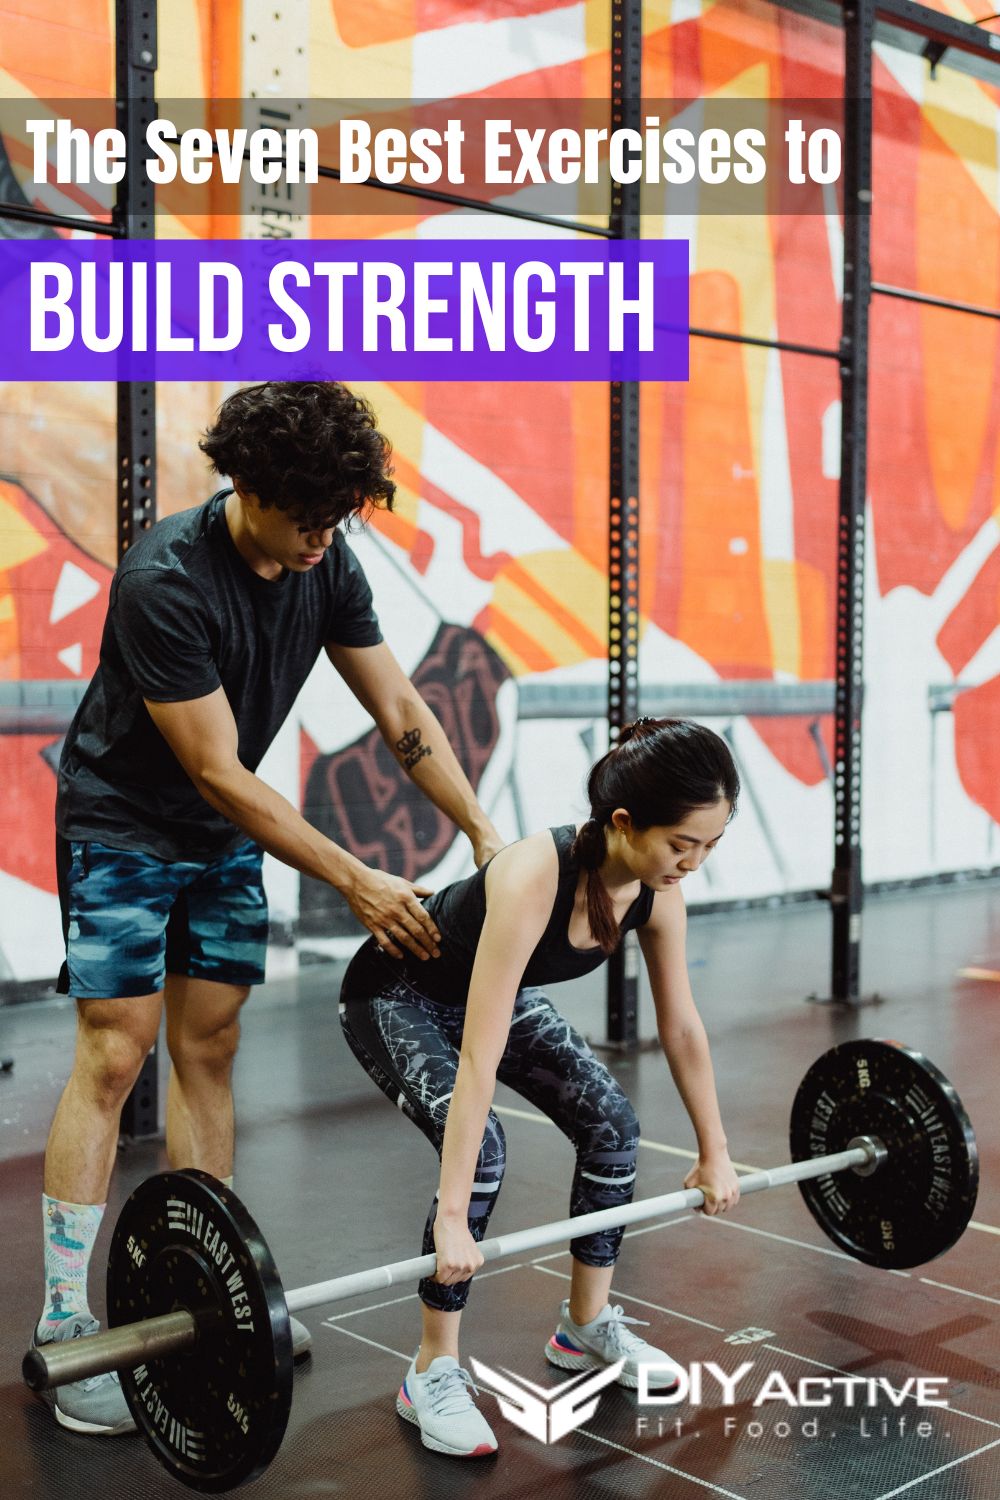 The Seven Best Exercises to Build Strength Revised 2